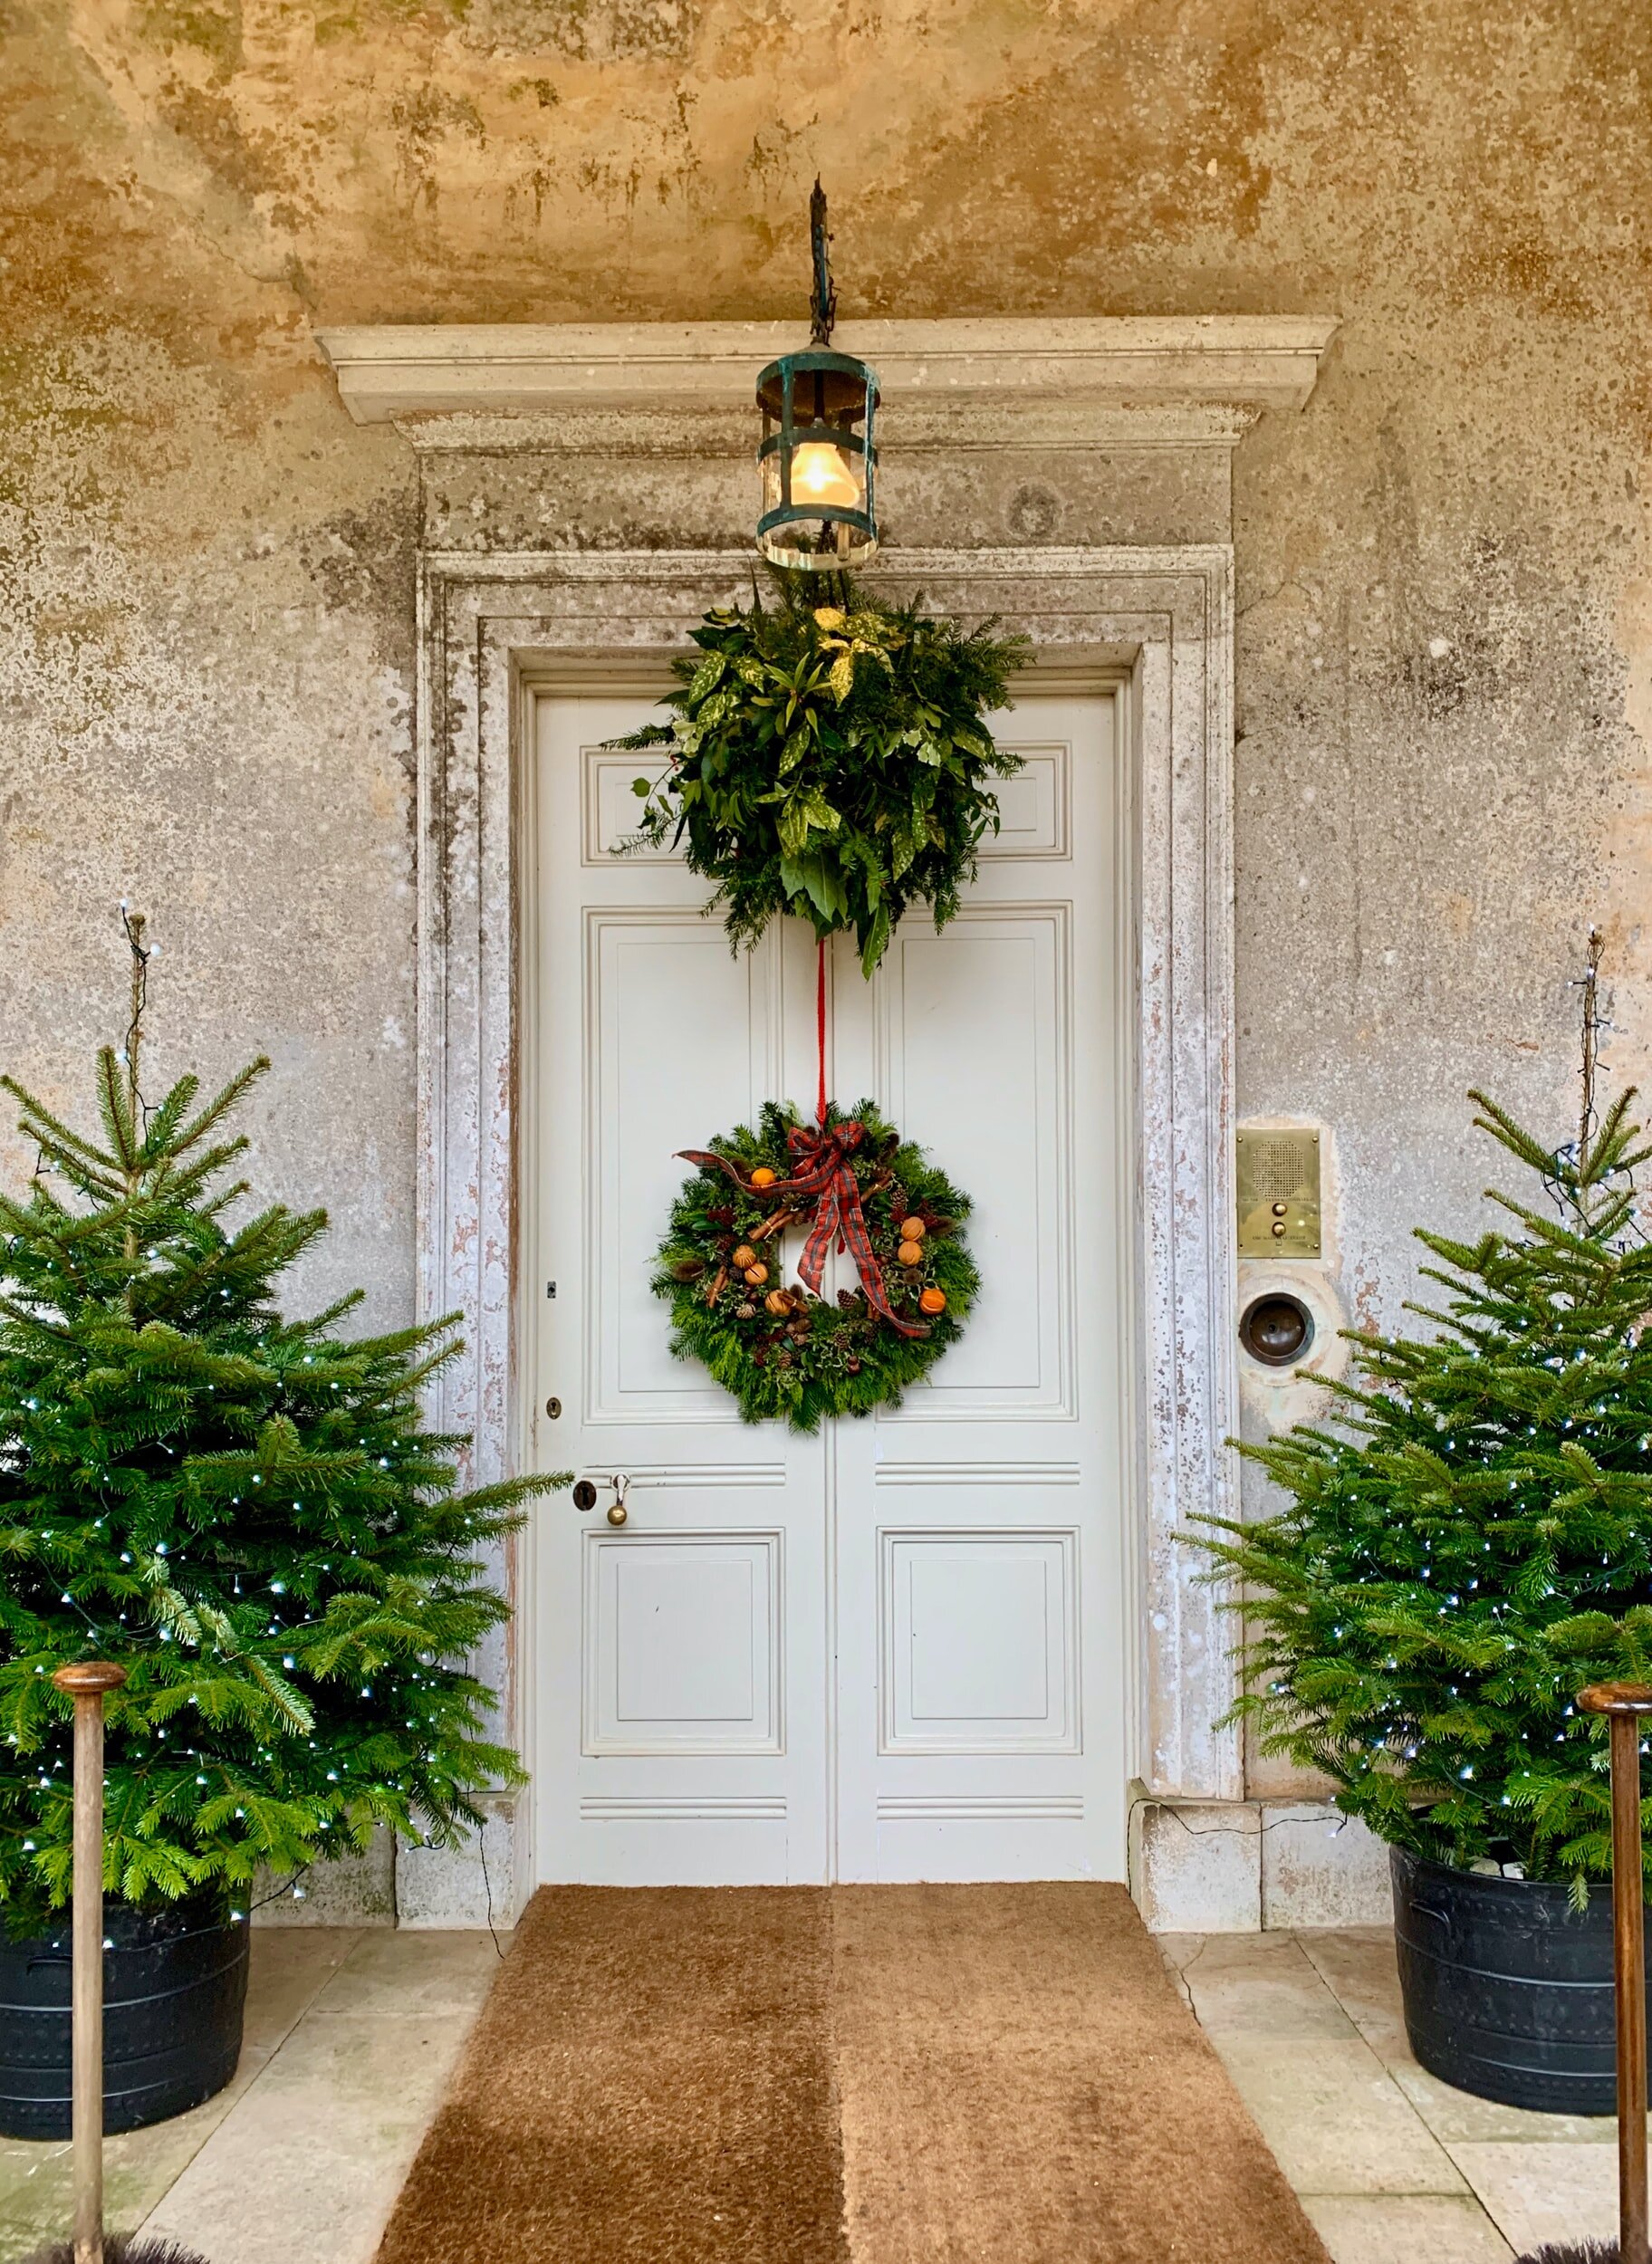 Put it on your door - We are aware your door is generally the first choice for wreath placement, but it is time to mix it up, bring them inside.